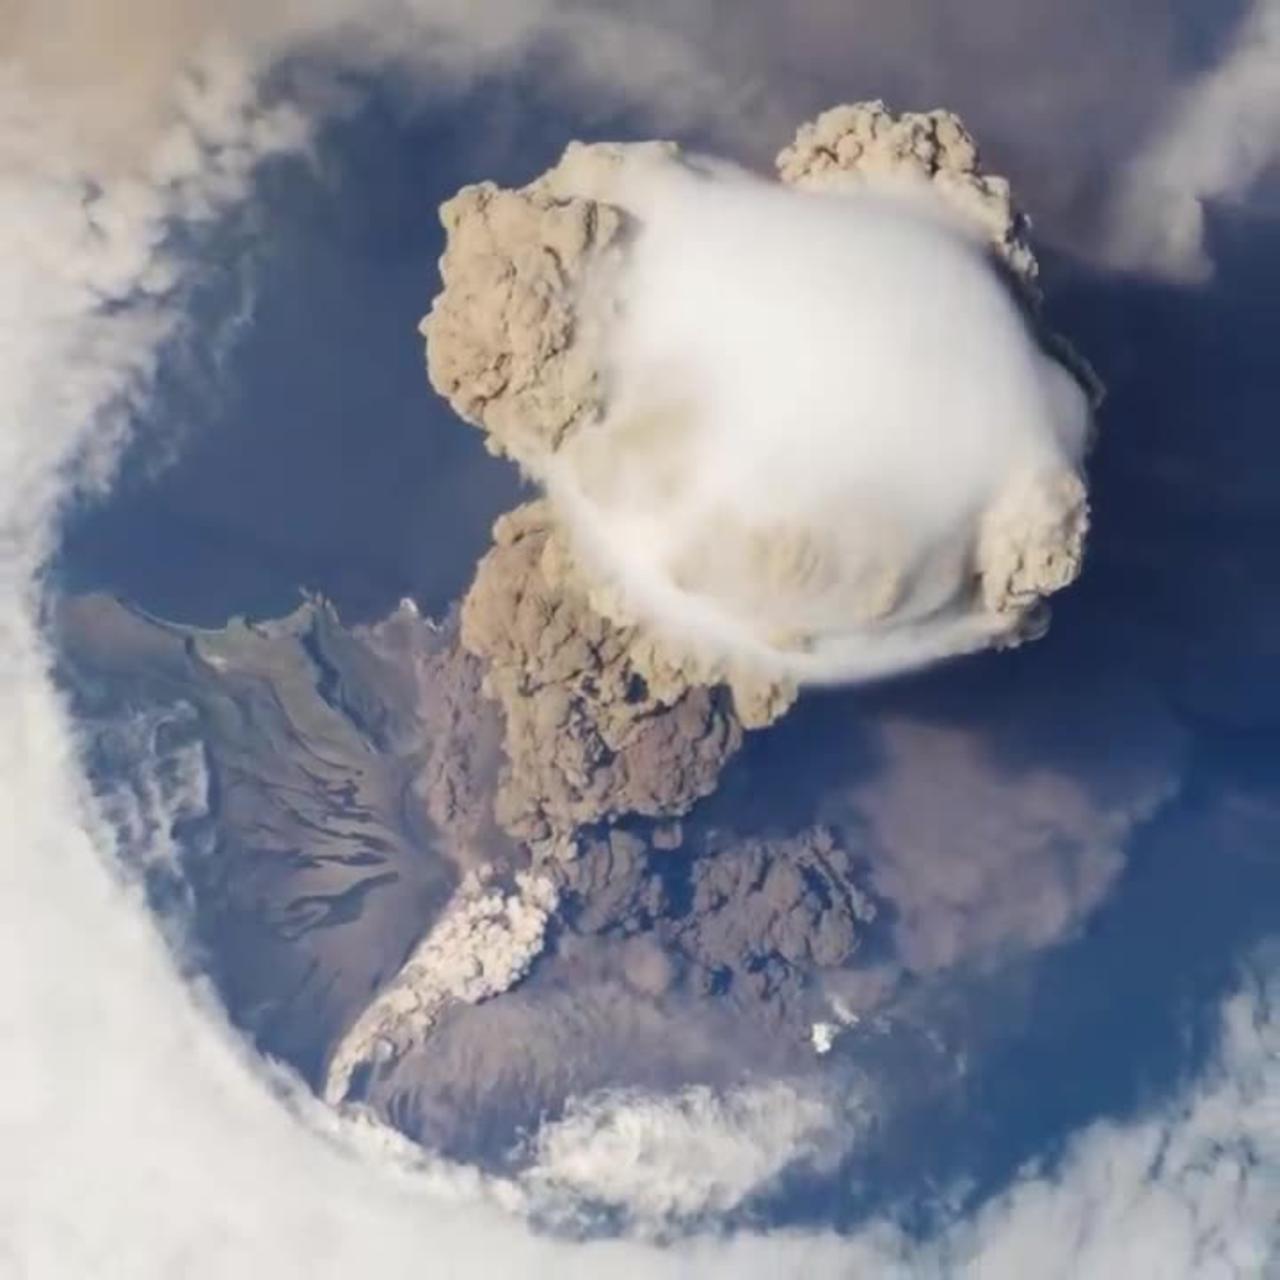 NASA | Volcano Eruption from the International Space Station